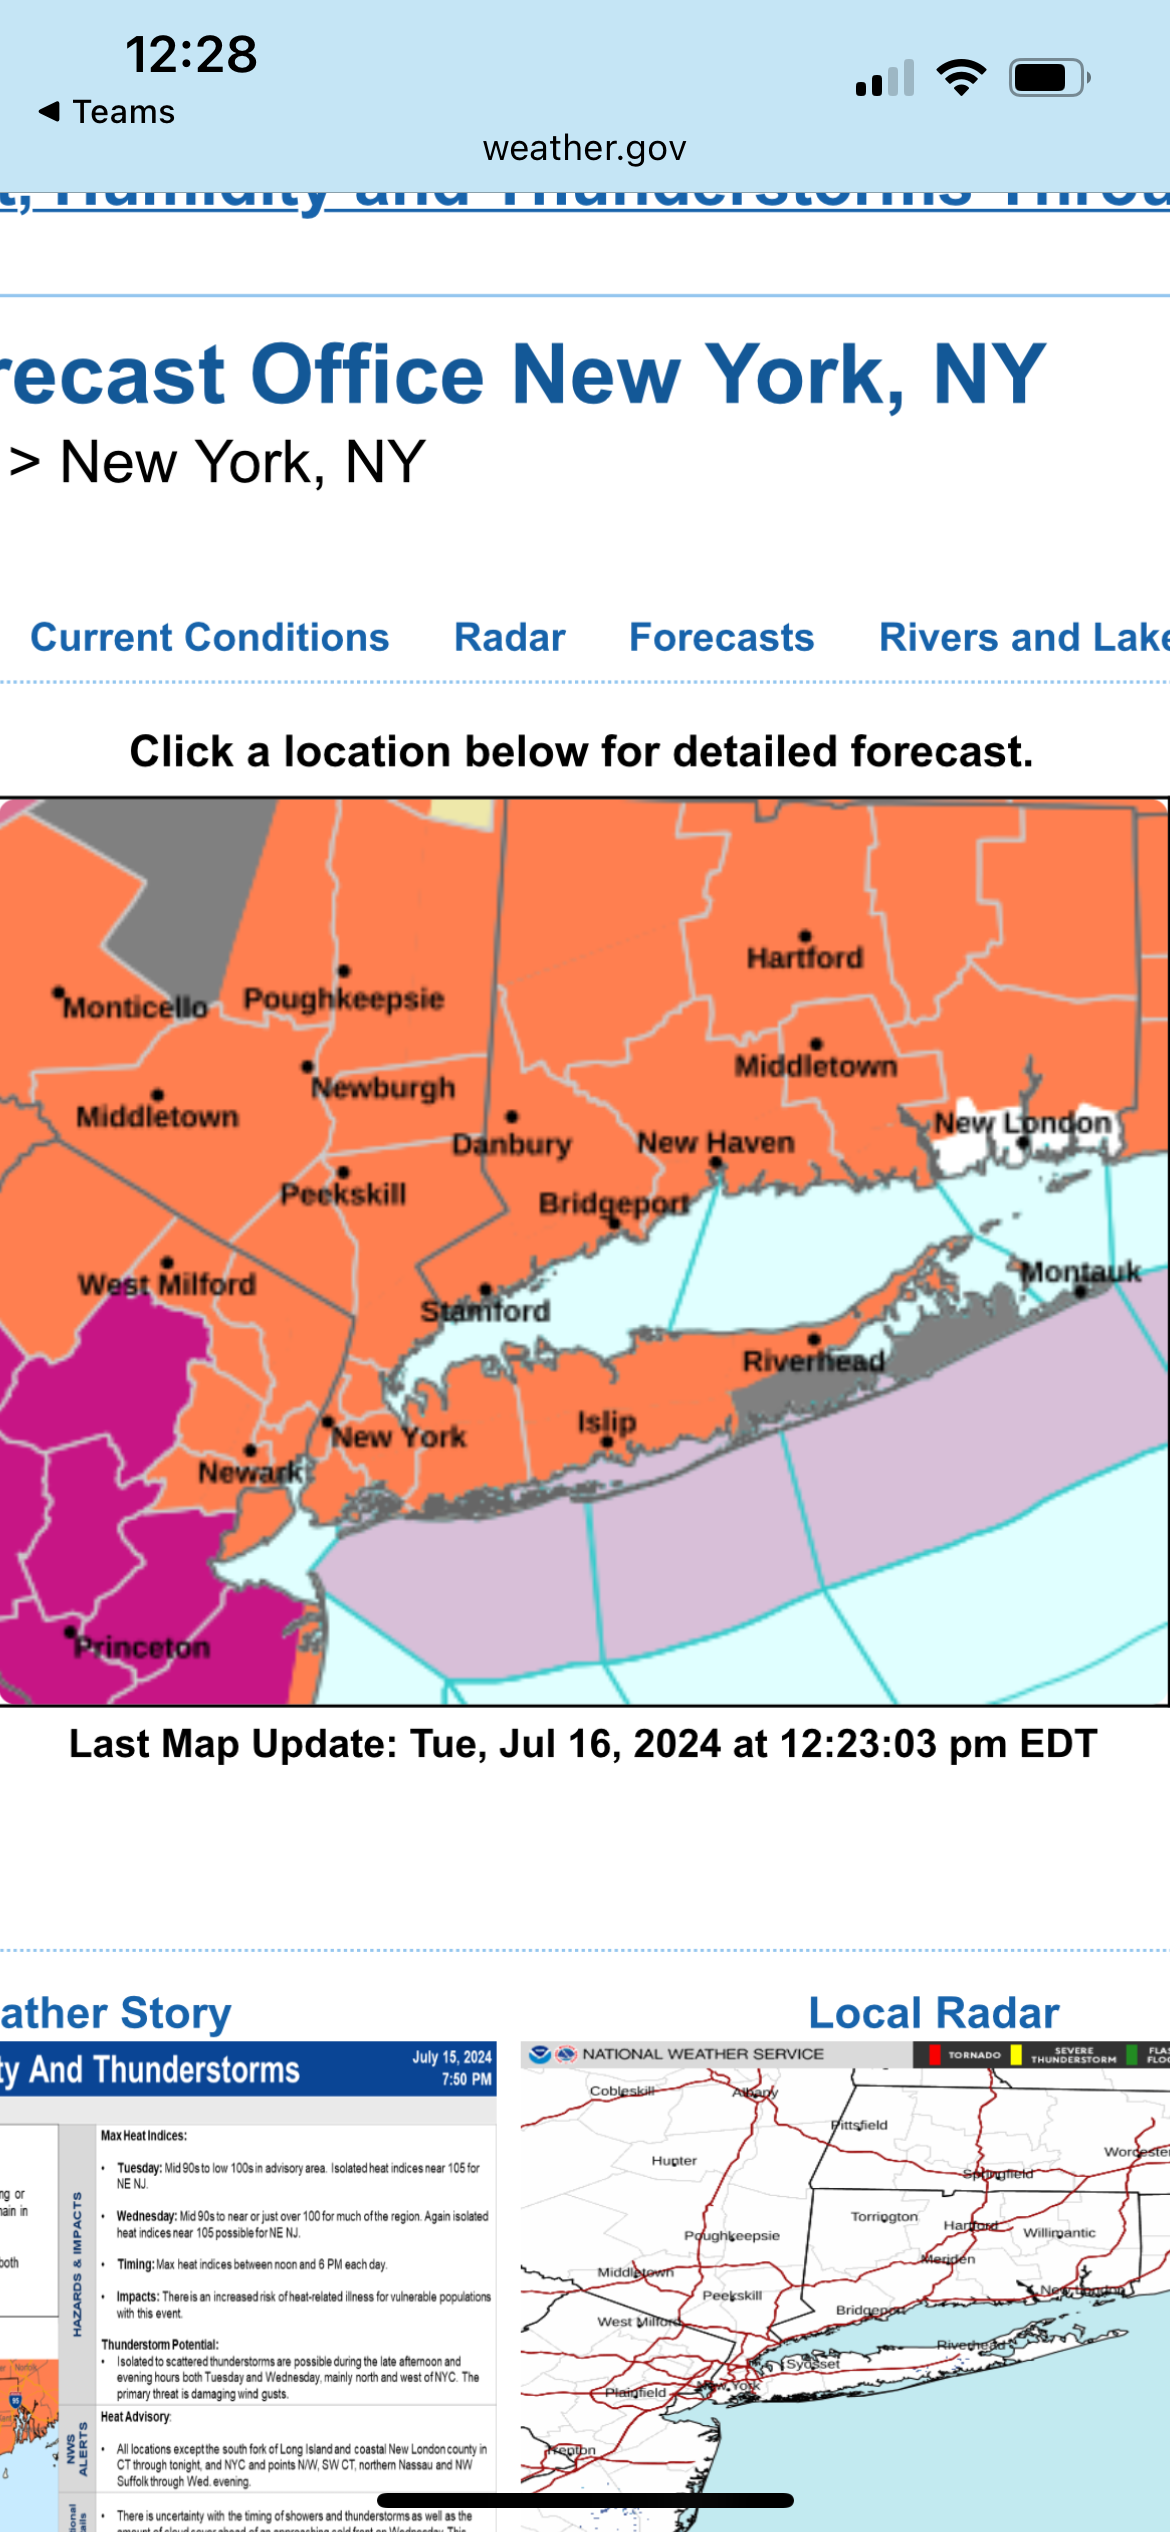 When will we get a break from heat, humidity? The latest information on advisories, alerts